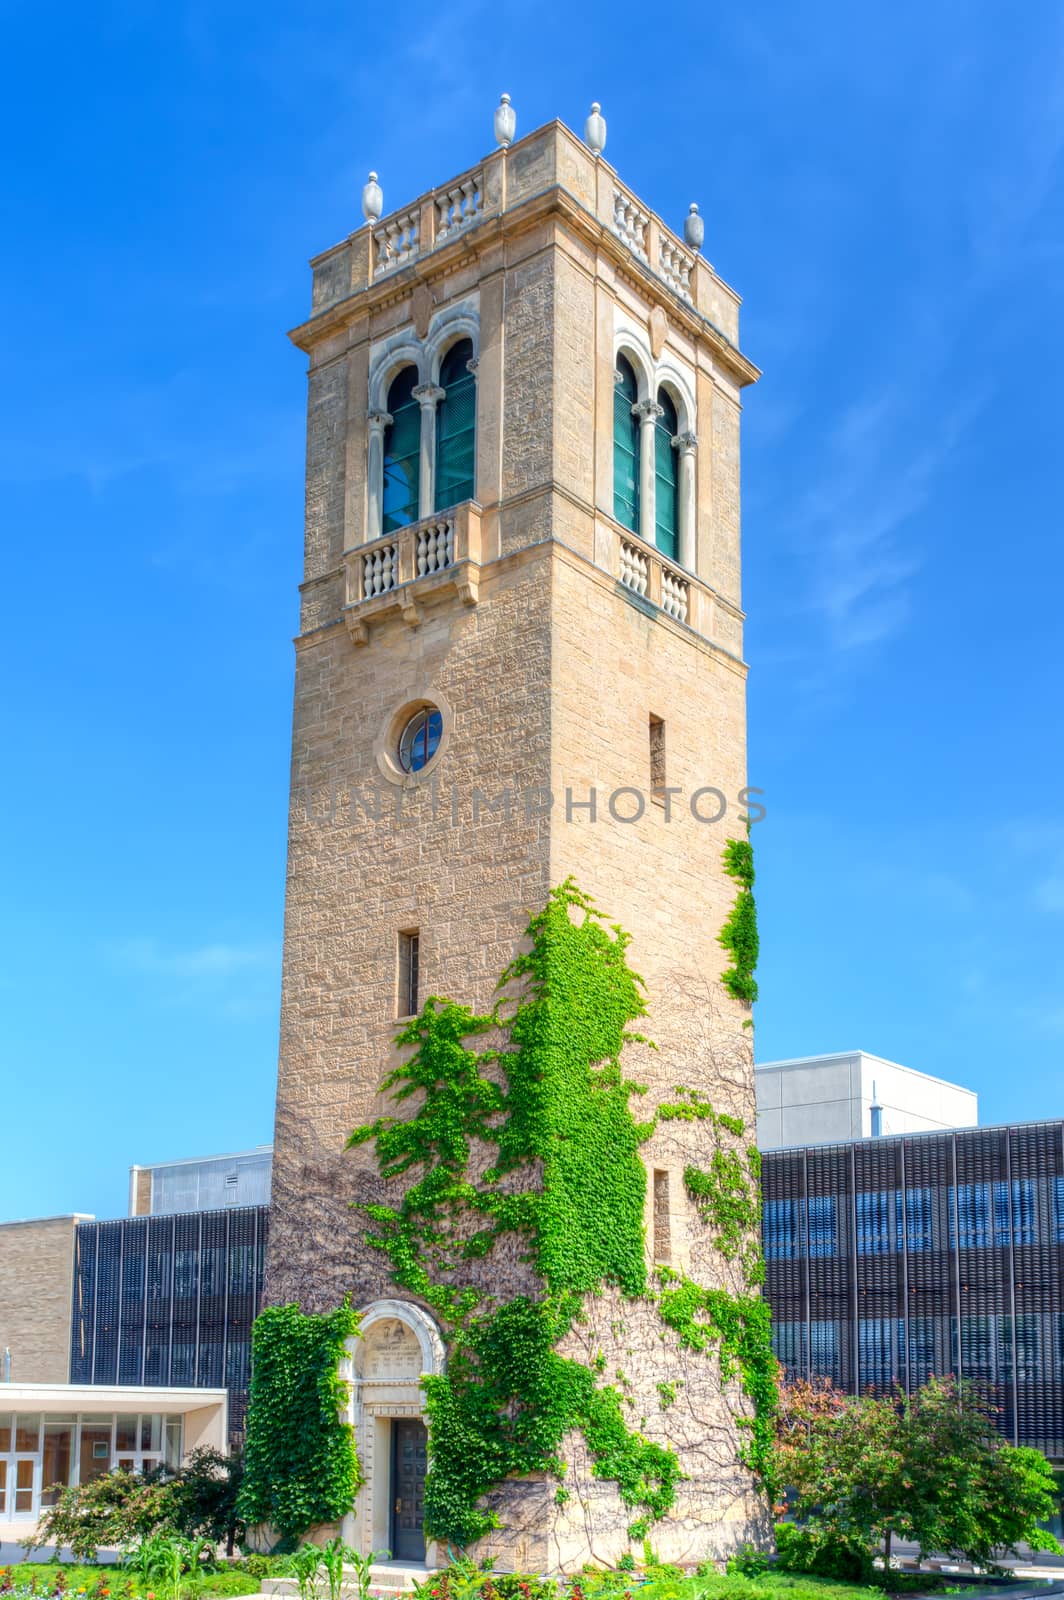 MADISON, WI/USA - JUNE 26, 2014: Carillon Tower on the campus of the University of Wisconsin-Madison. The University of Wisconsin is a Big Ten University in the United States.